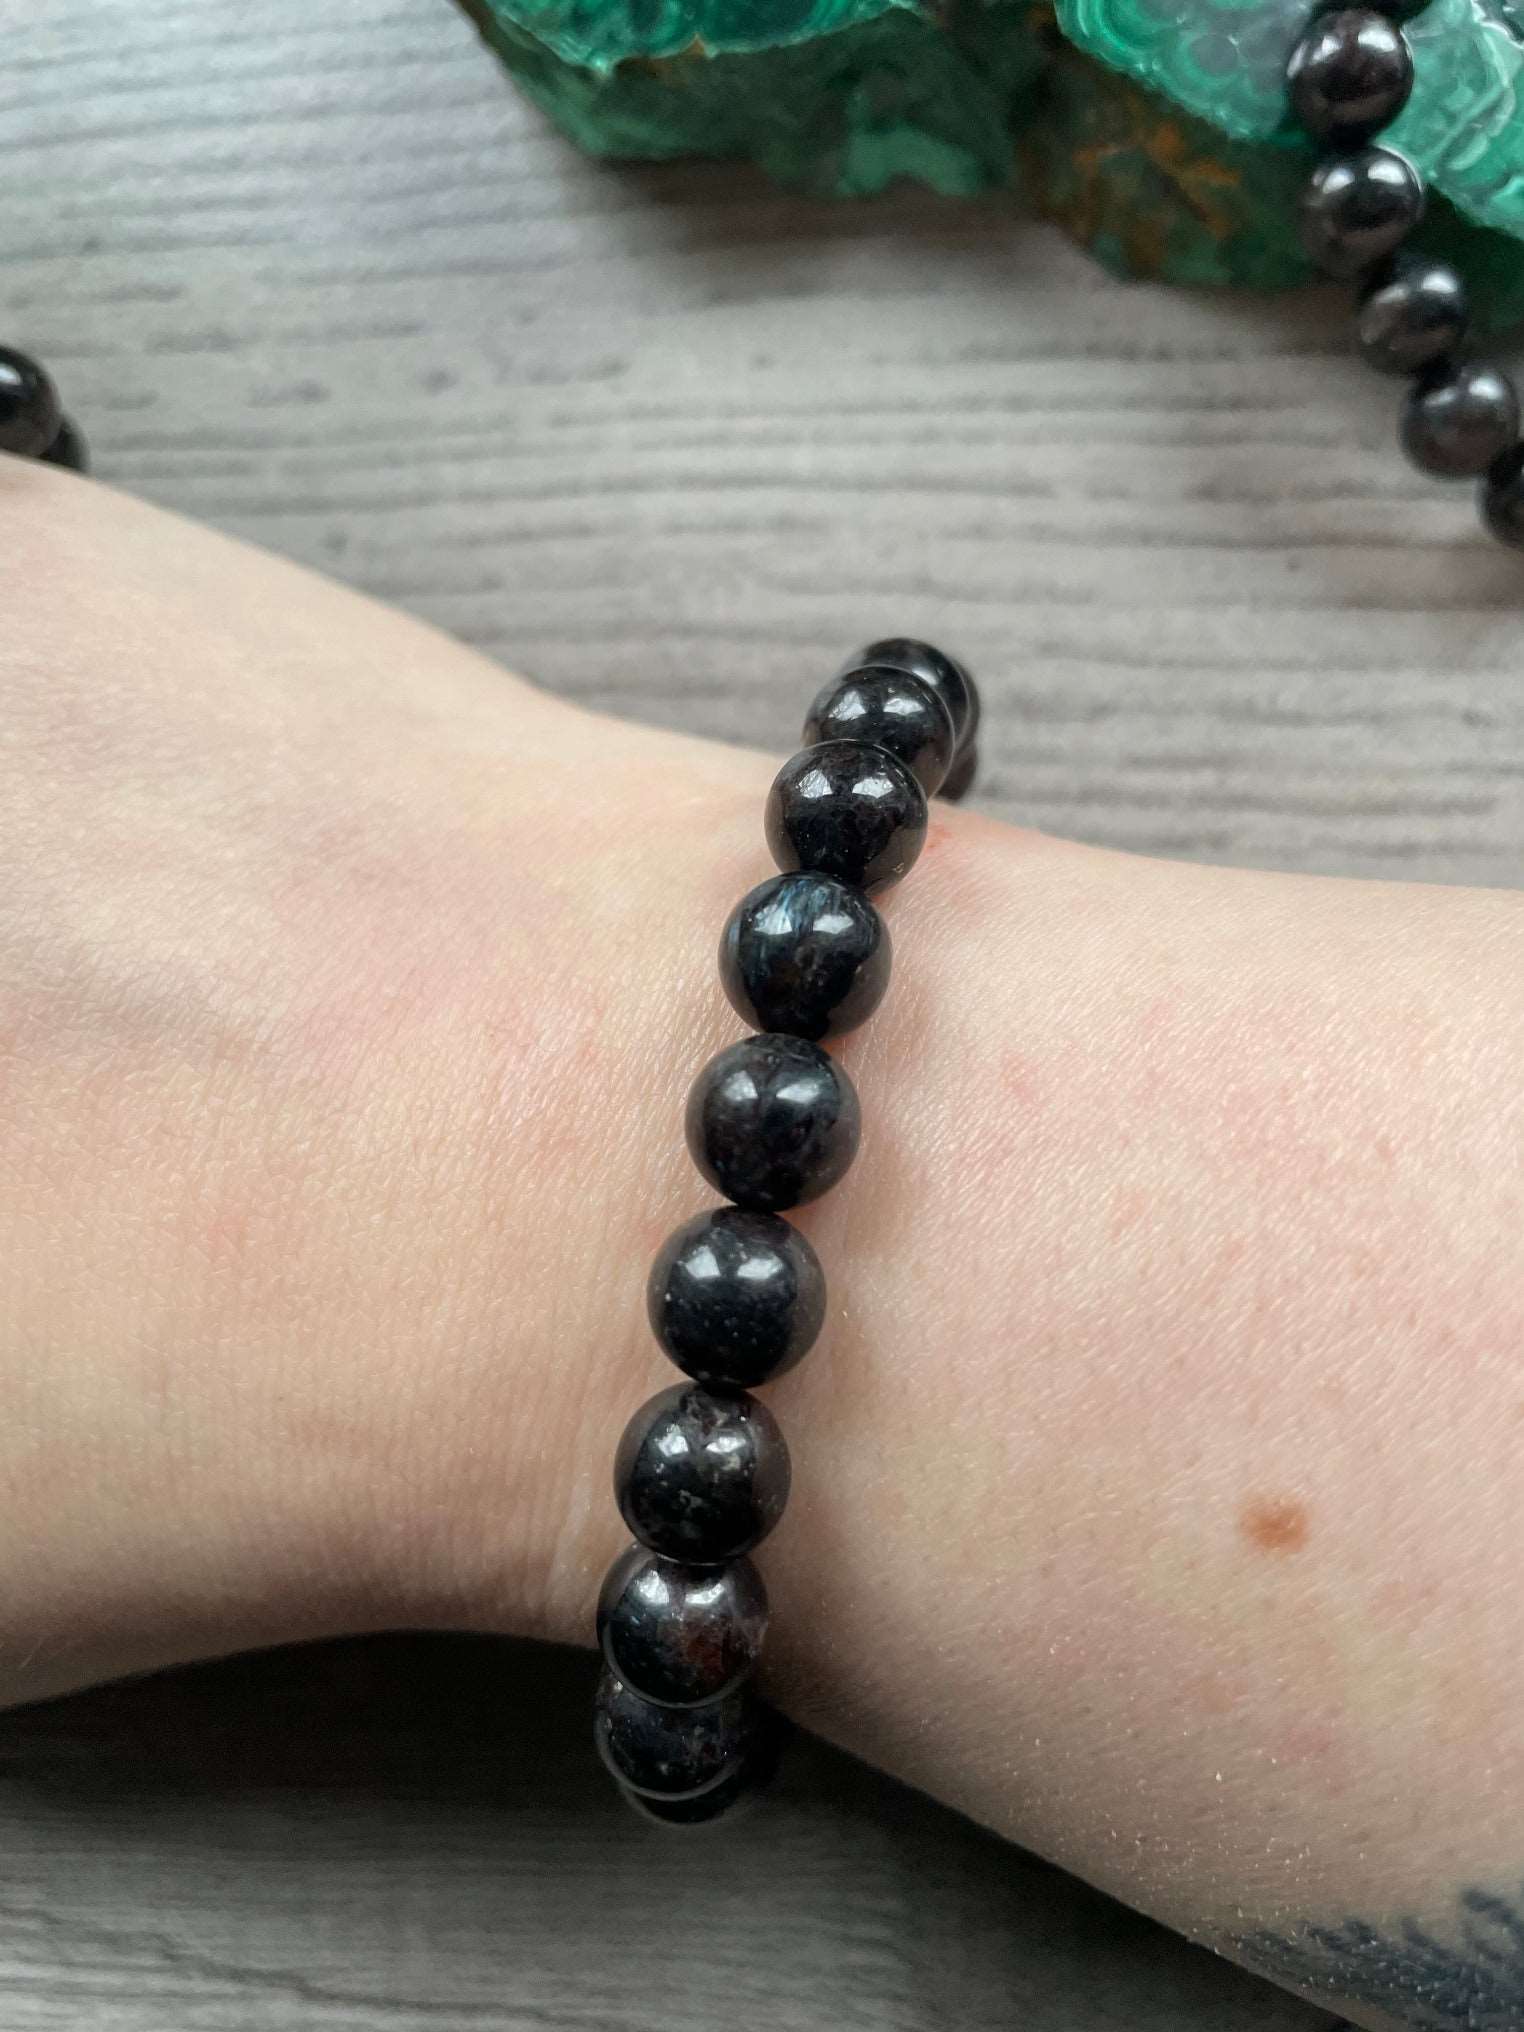 Pictured is an arfvedsonite bead bracelet.